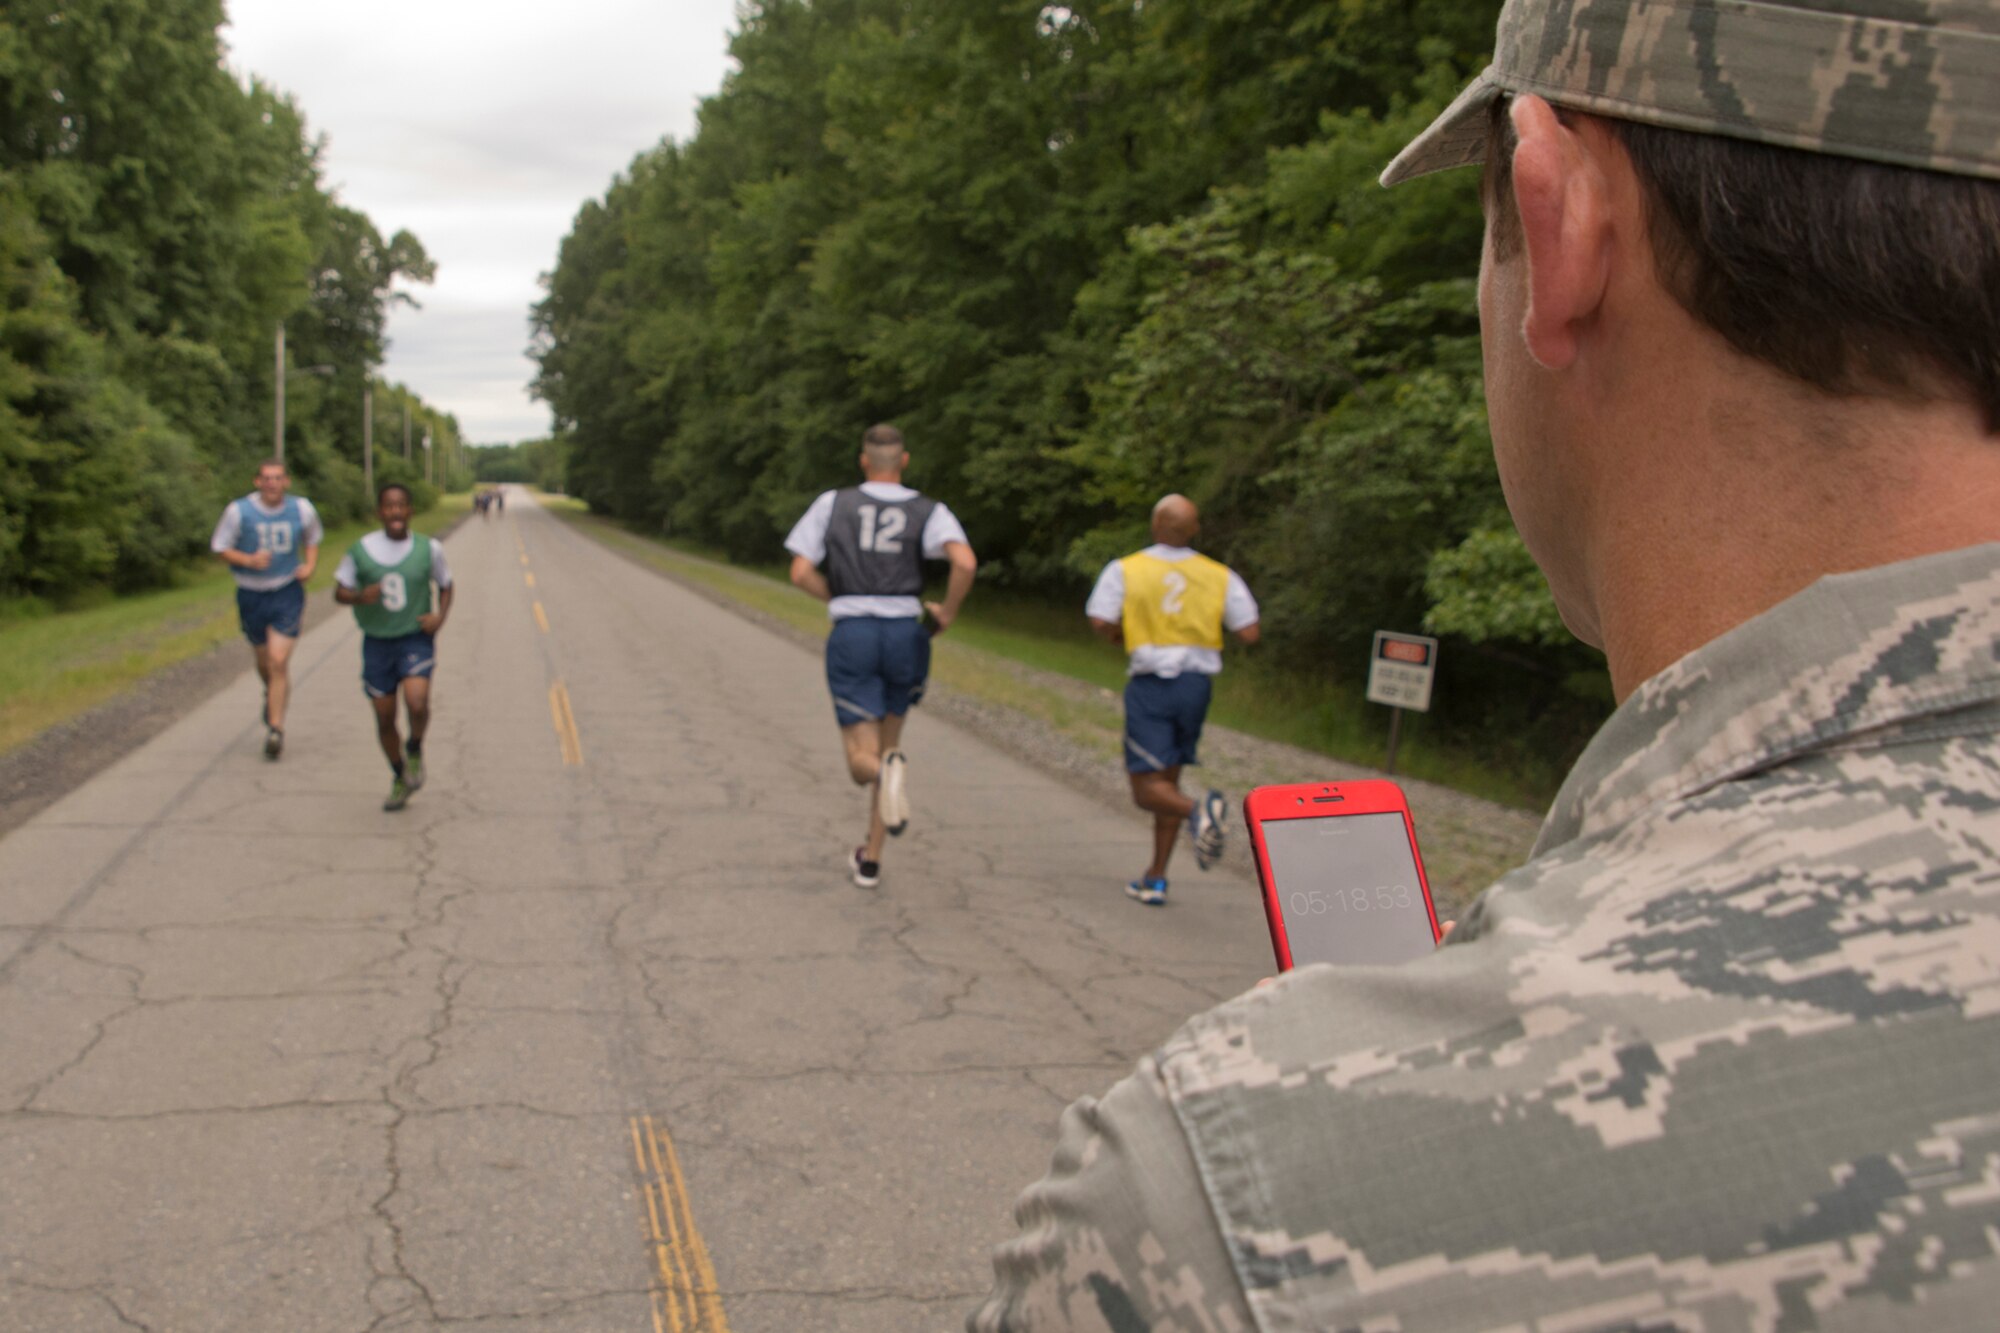 U.S. Air Force Reserve Tech Sgt. Andy Paladino, special handling craftsman, 96th Aerial Port Support Squadron, calls out times at the turnaround point of the 1.5-mile timed run during a physical fitness assessment test at Little Rock Air Force Base, Ark., Aug. 5, 2016. Many Airmen push themselves to score 90 or above, which allows them to test annually, rather than biannually. (U.S. Air Force photo by Master Sgt. Jeff Walston/Released)